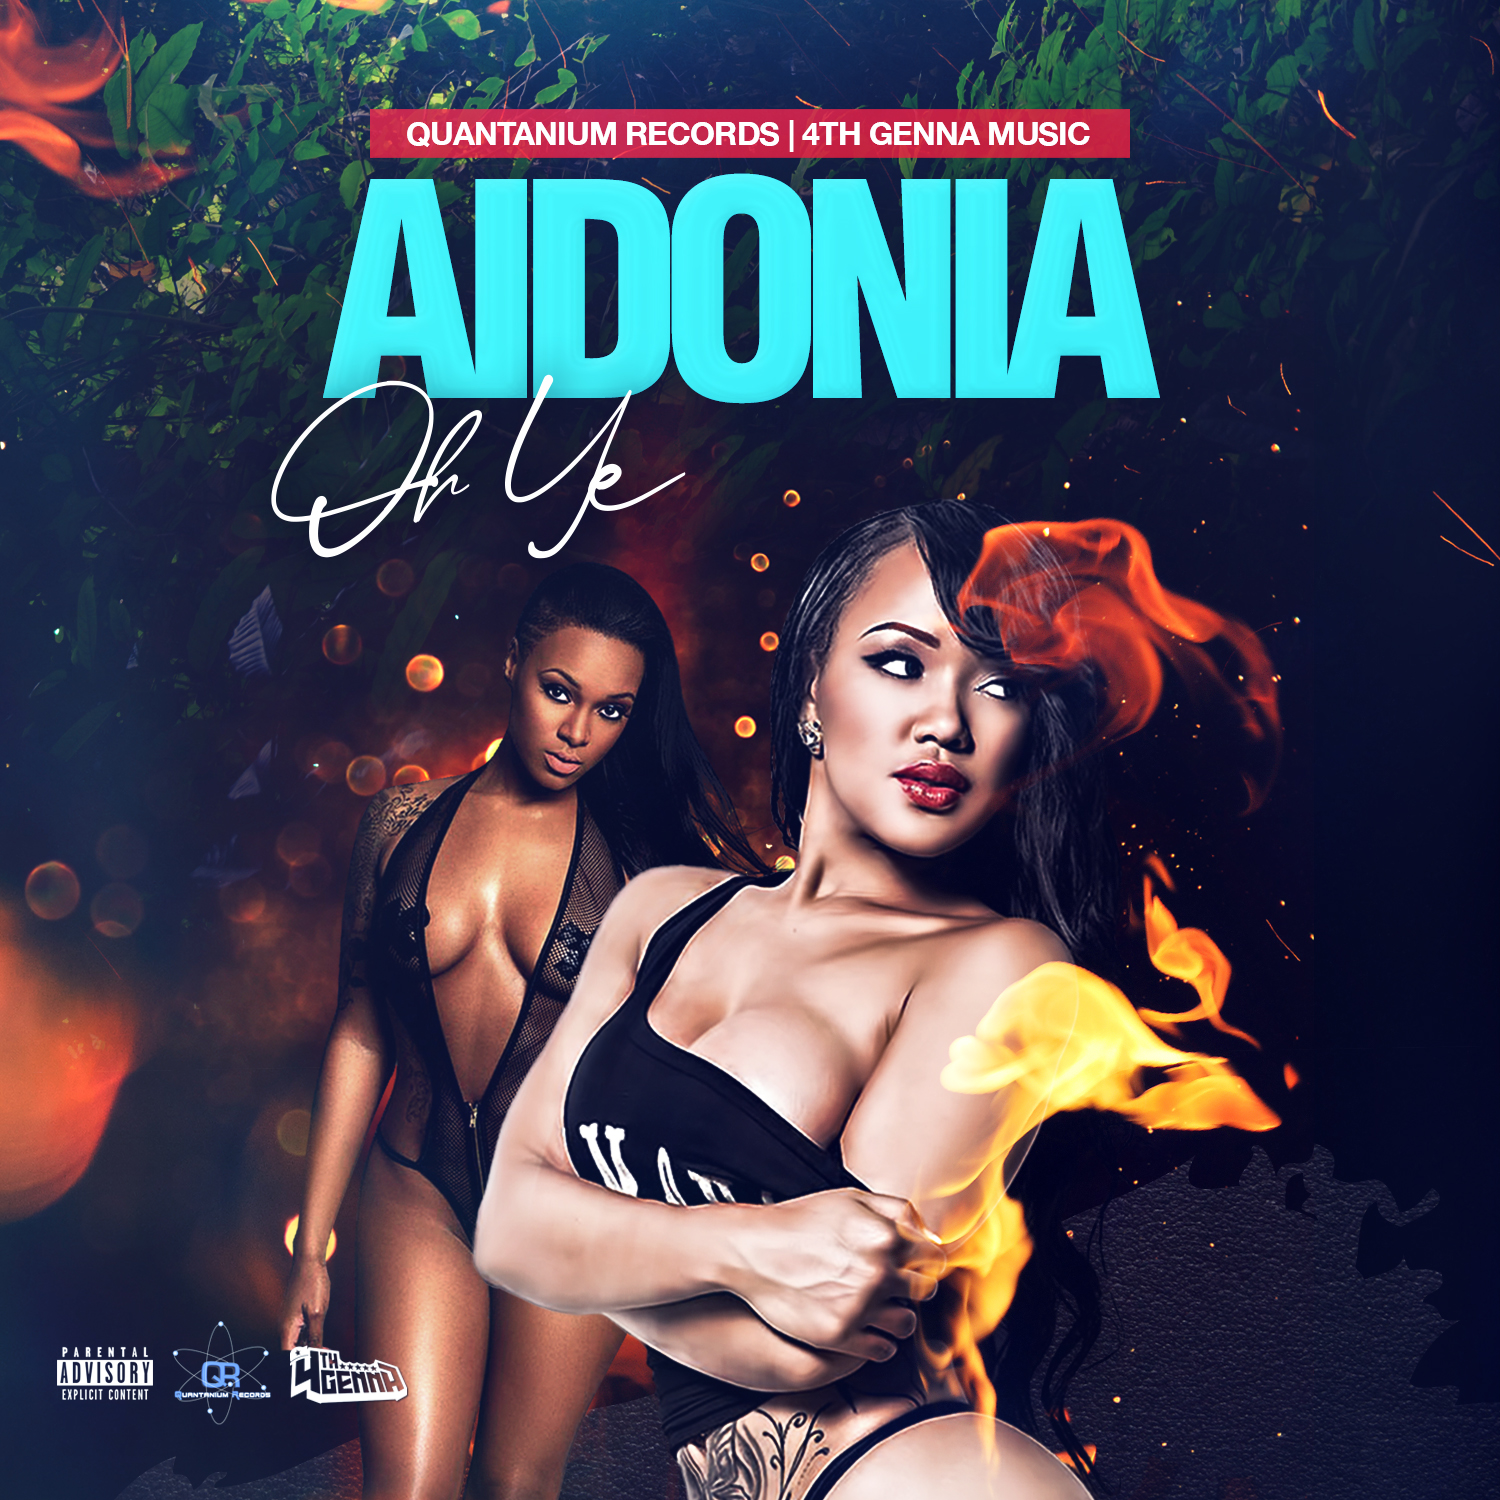 Art for OH YE by Aidonia